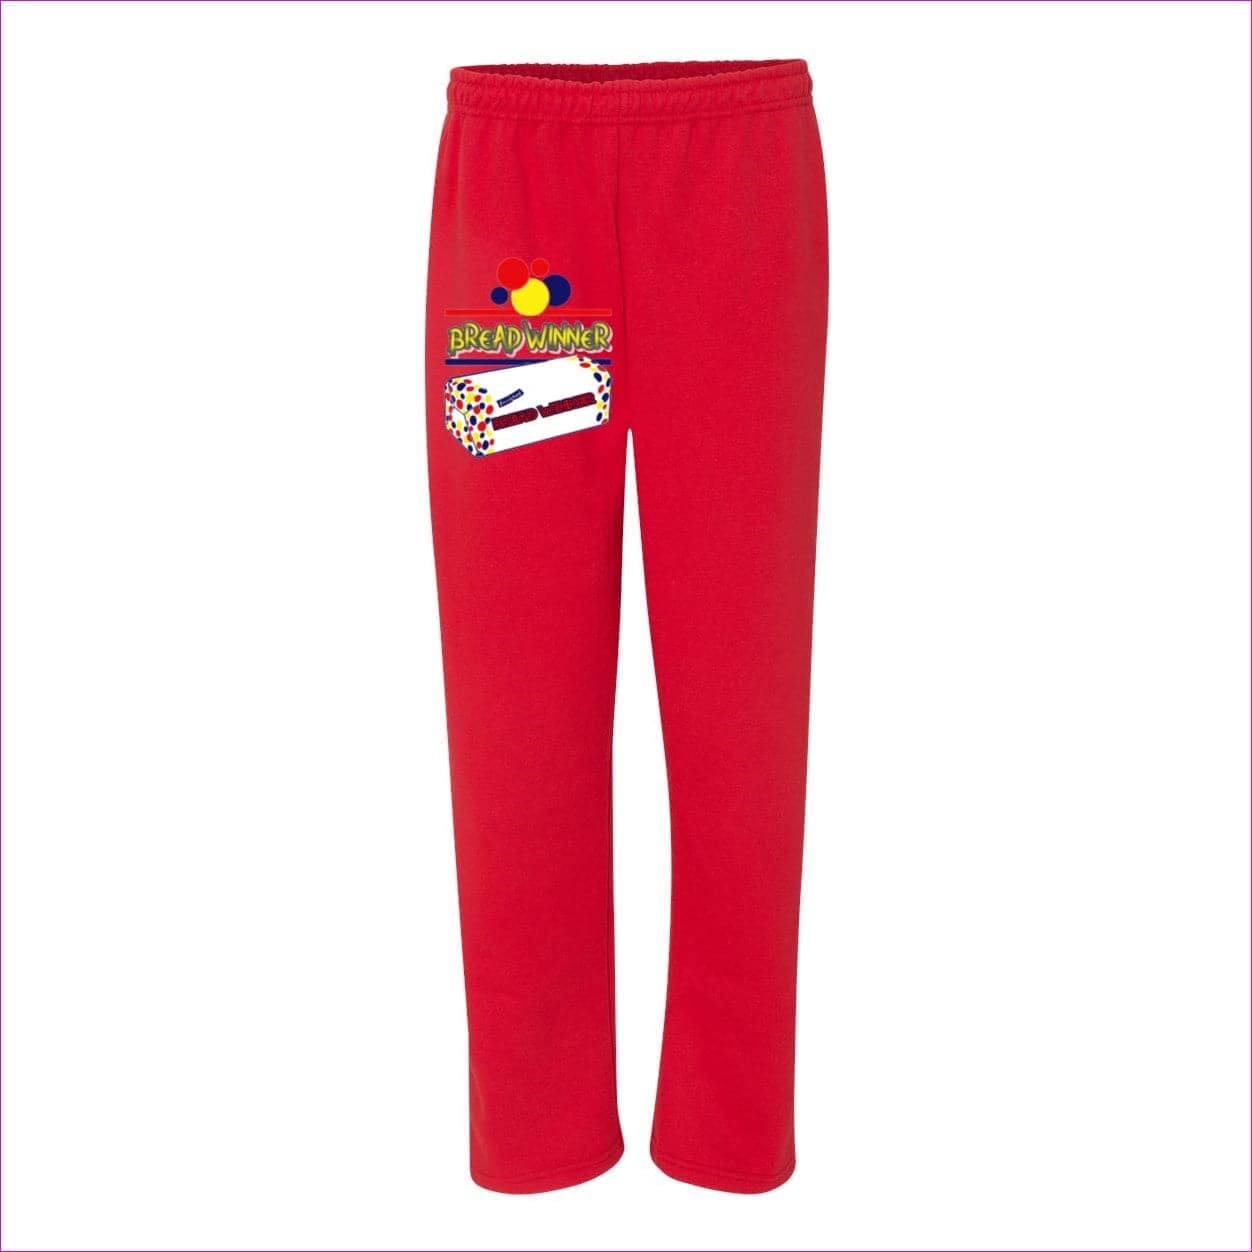 Red Bread Winner Heavy Sweatpants with Pockets - men's sweatpants at TFC&H Co.